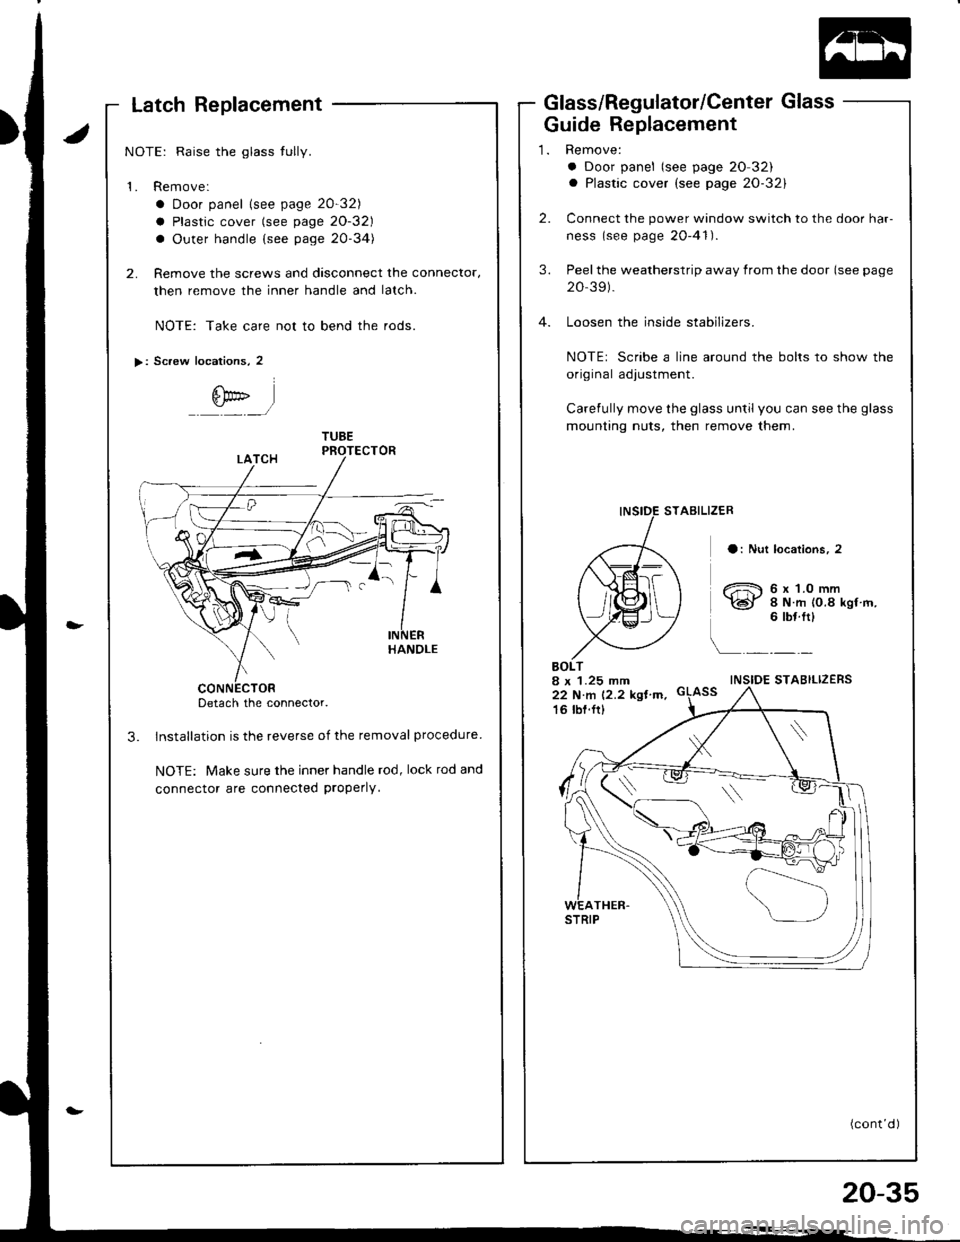 HONDA INTEGRA 1998 4.G Workshop Manual Latch Replacement
NOTE: Raise the glass tully.
1. Remove:
a Door panel lsee page 20-32)
a Plastic cover (see page 20-32)
a Outer handle {see page 20-34)
2. Remove the screws and dasconnect the connect